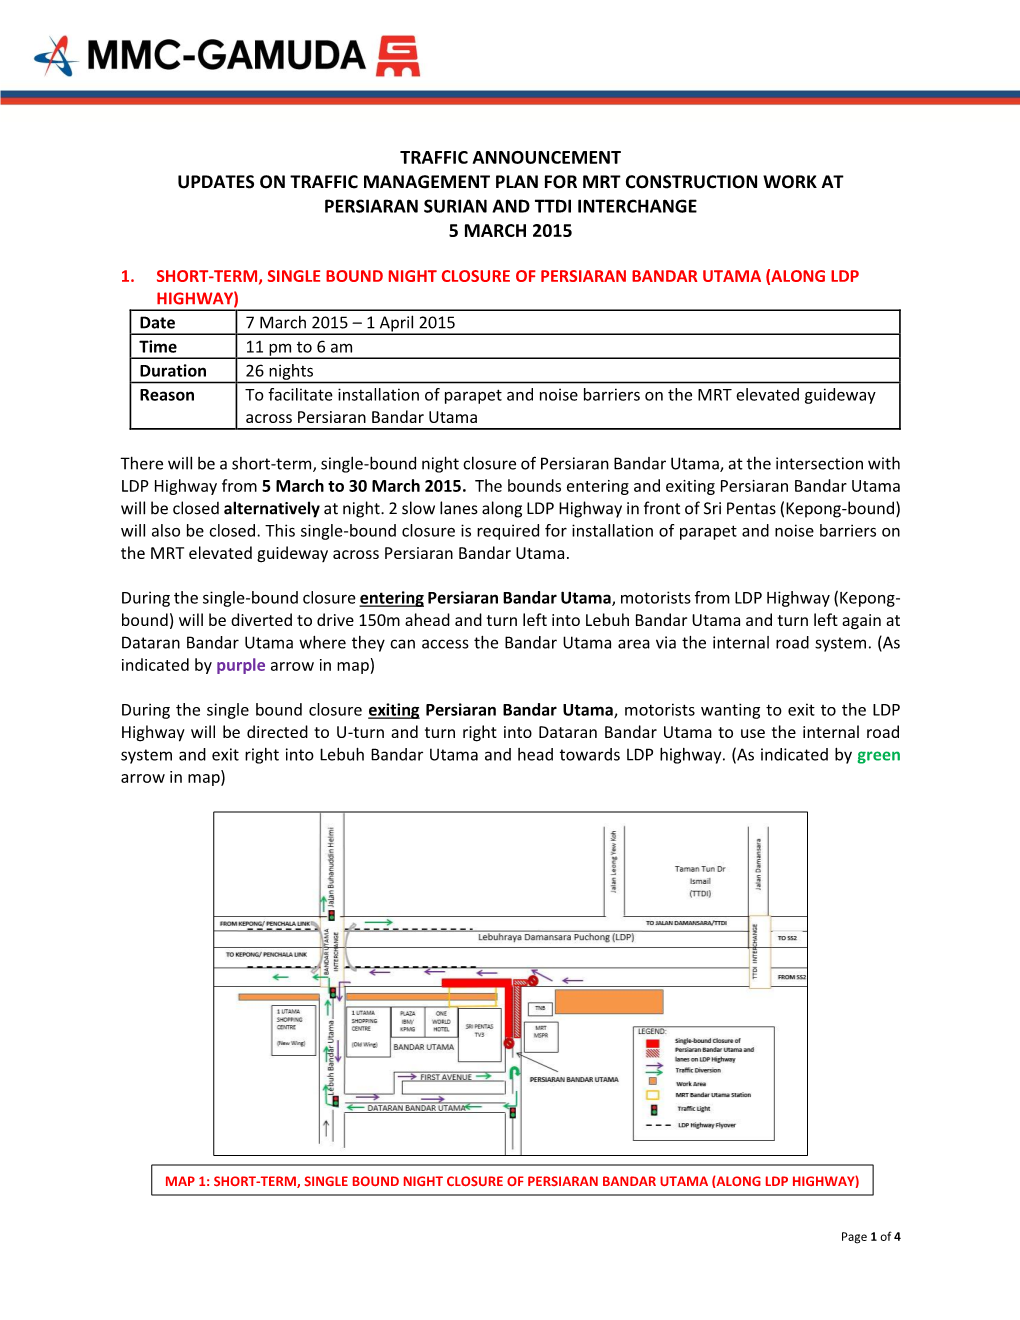 Traffic Announcement Updates on Traffic Management Plan for Mrt Construction Work at Persiaran Surian and Ttdi Interchange 5 March 2015